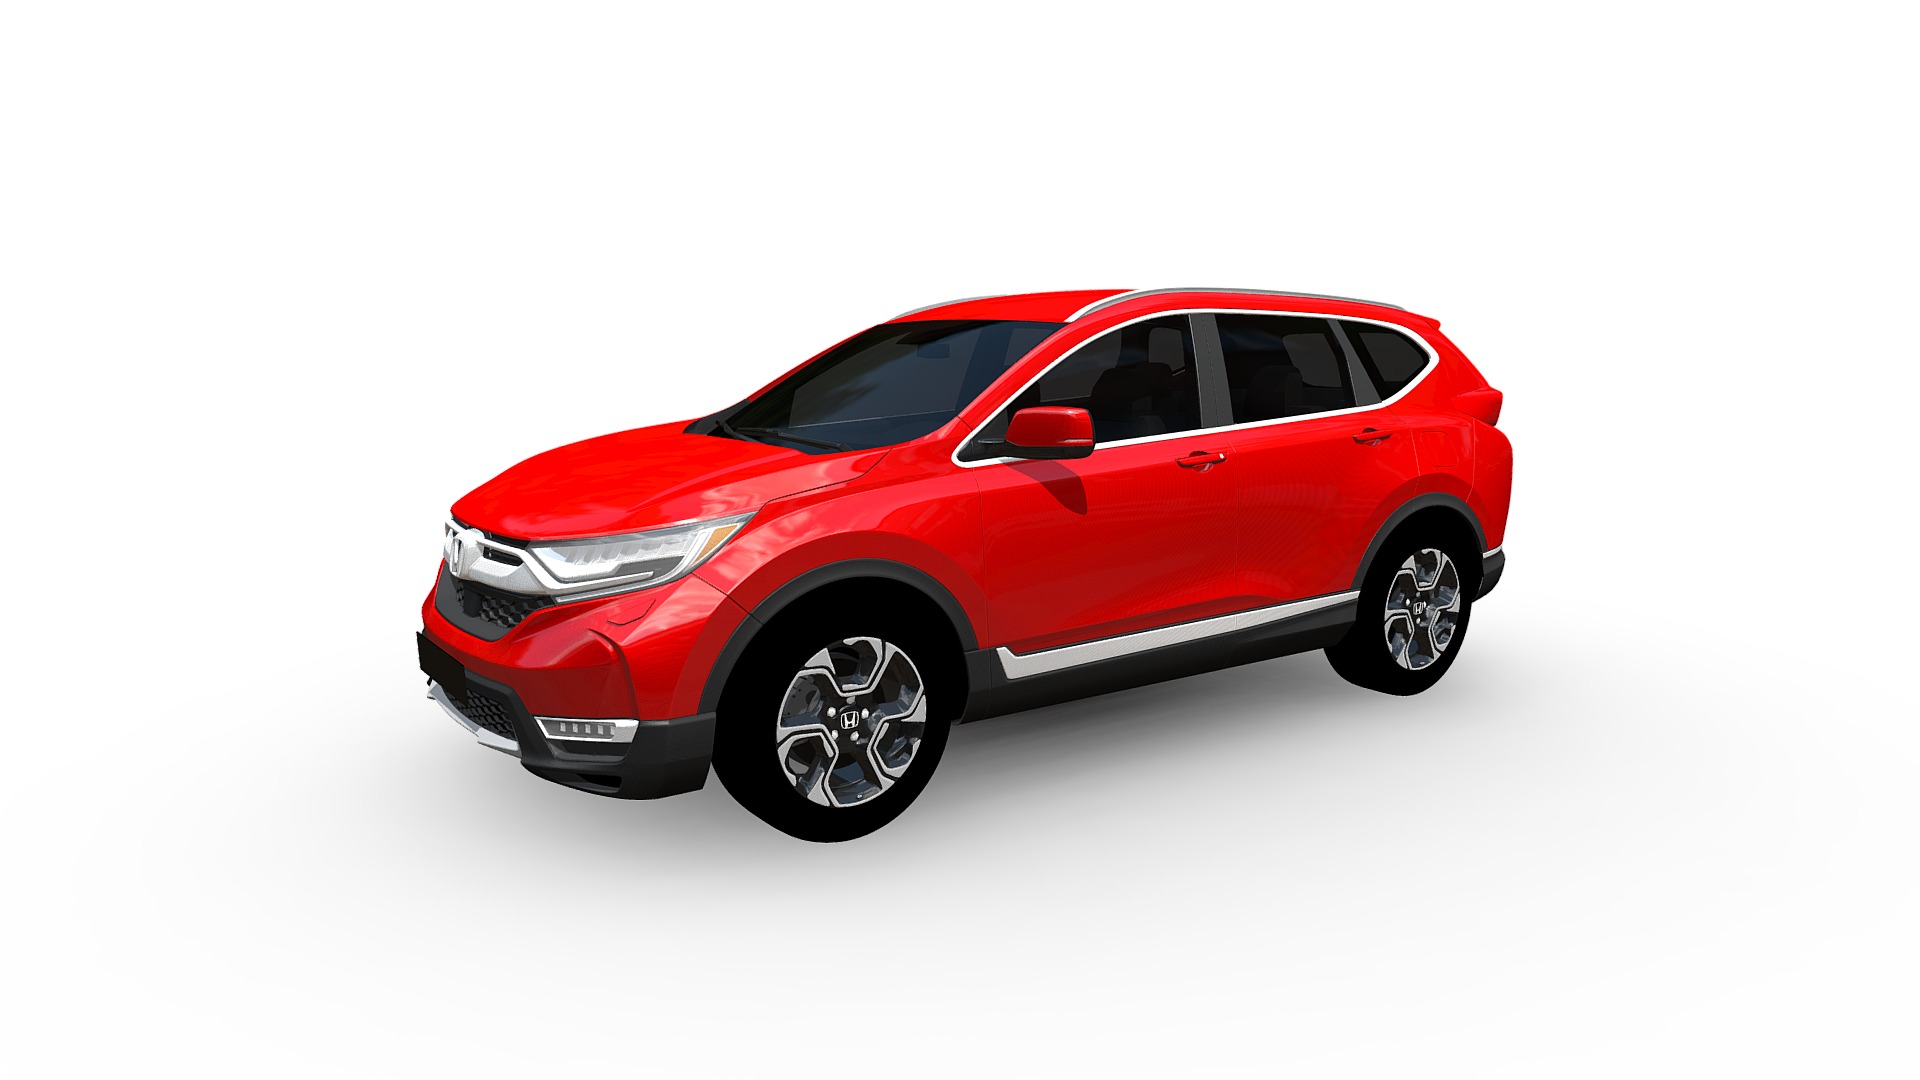 3D model Honda CR-V 2019 - This is a 3D model of the Honda CR-V 2019. The 3D model is about a red car with a white background.